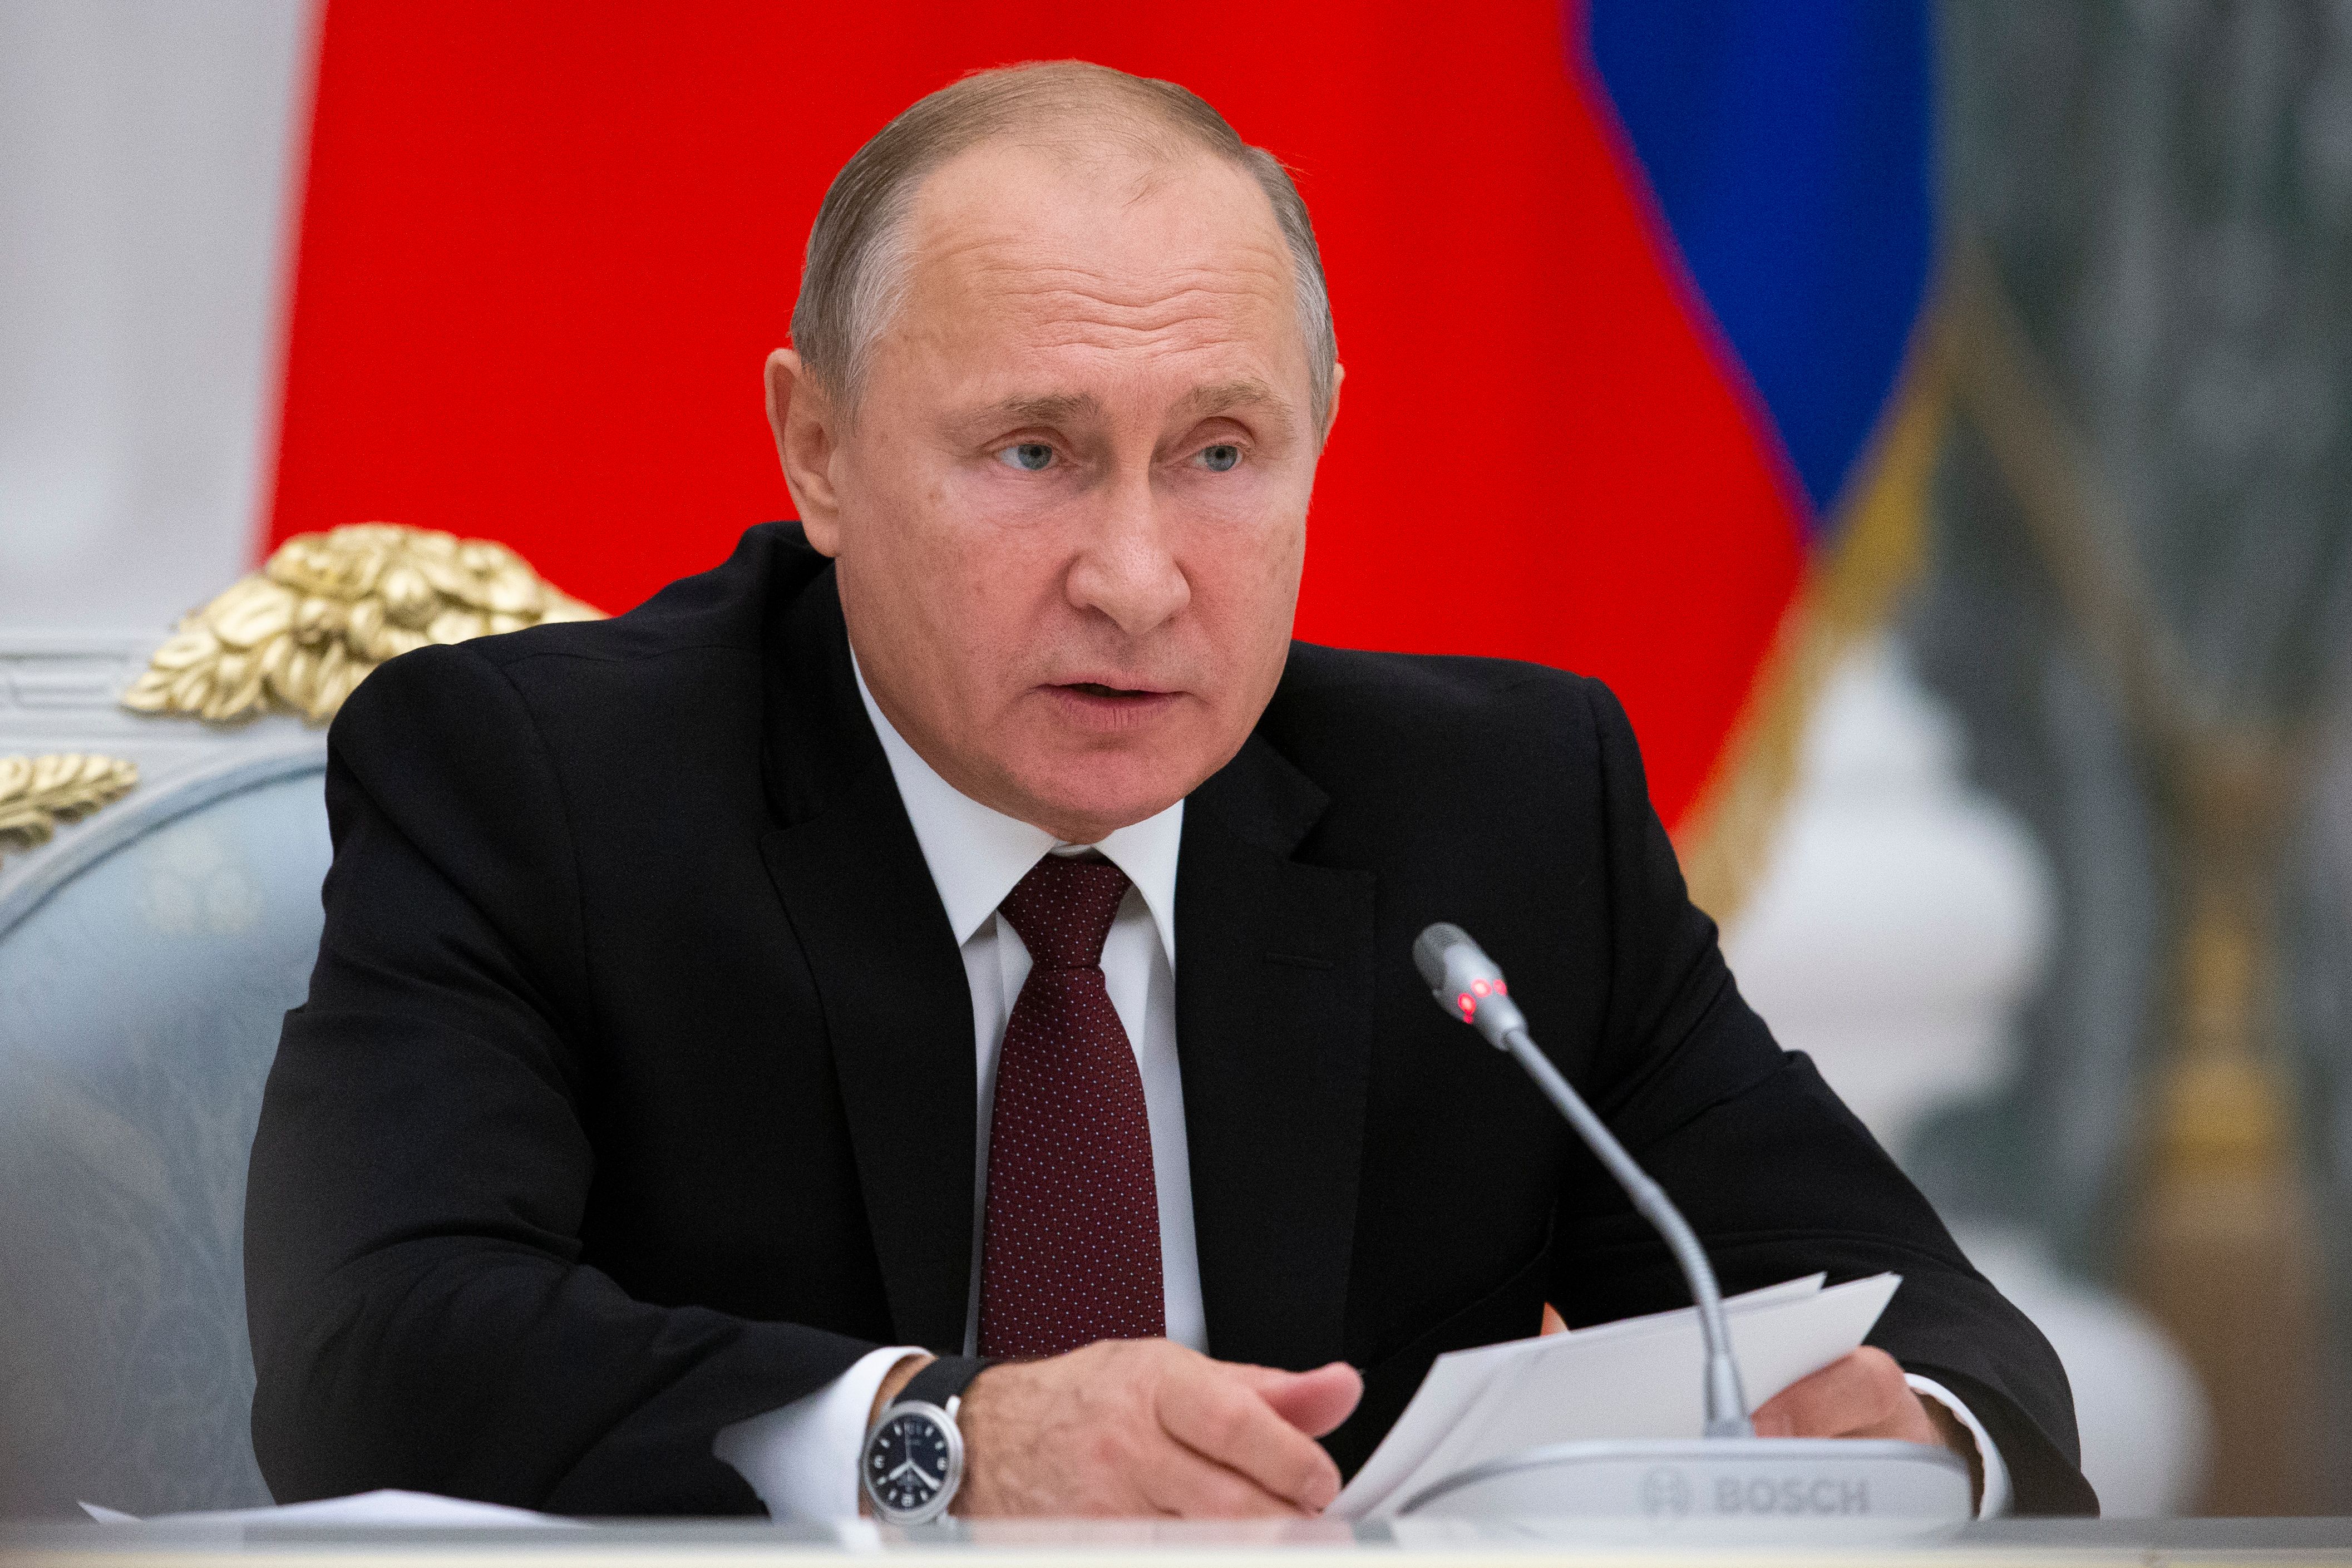 Russian President Vladimir Putin speaks a meeting to discuss preparation to mark the anniversary of the allied victory in the World War II in the Kremlin in Moscow on December 12, 2012. (ALEXANDER ZEMLIANICHENKO/AFP/Getty Images)